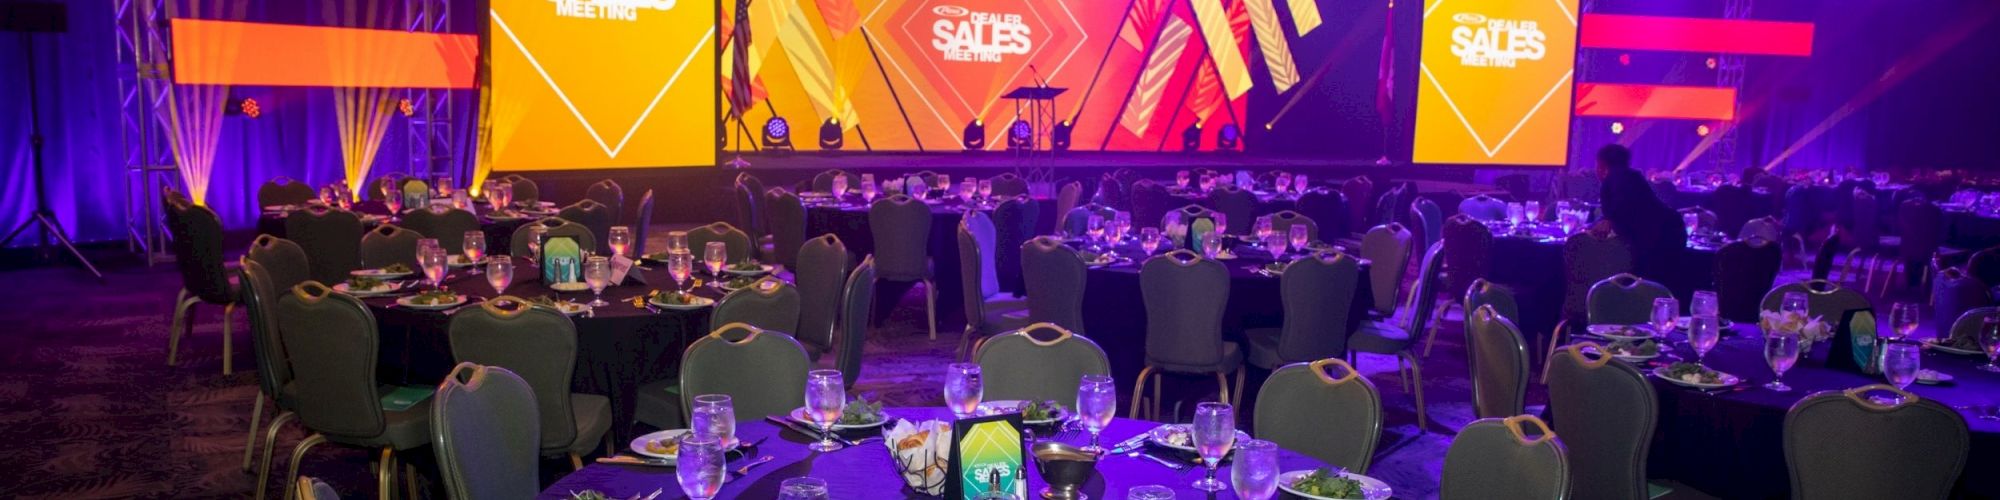 A conference or gala setup with round tables, plates of salad, glasses, and a stage with a large screen showing 